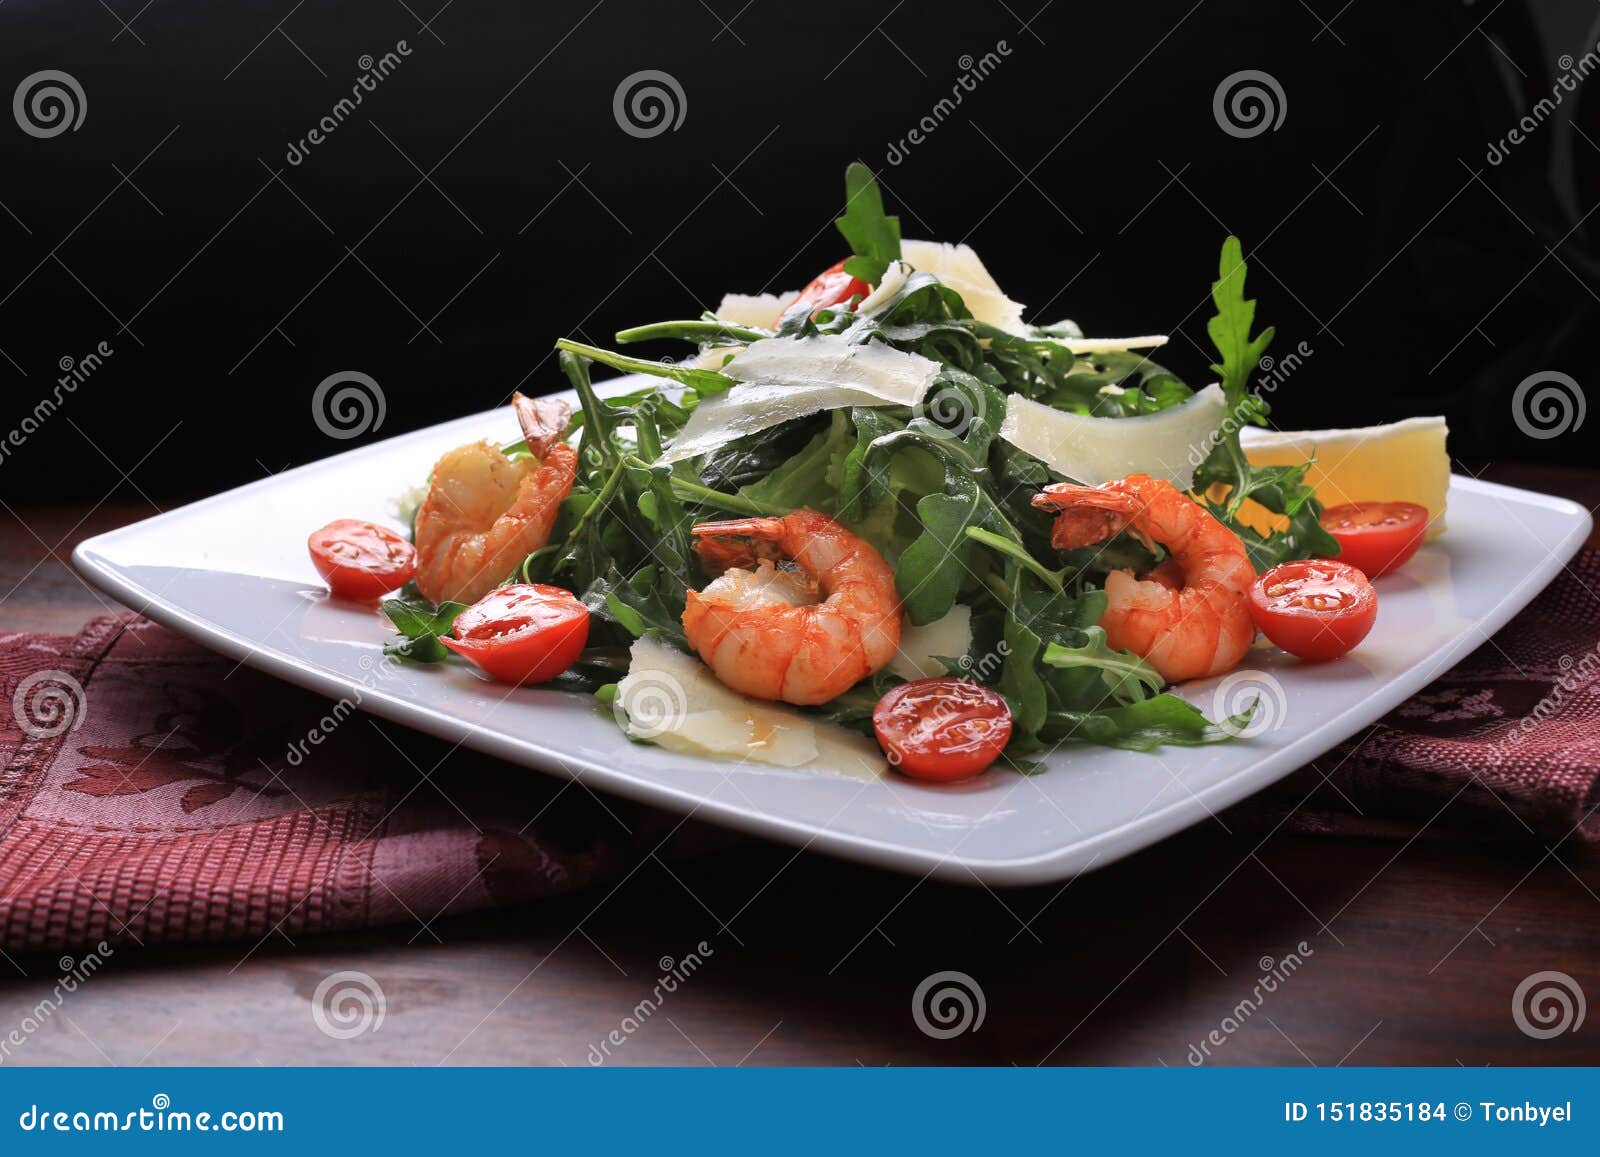 salad with arugula and cherry tomatoes with shrimp, slices of lemon and parmesan